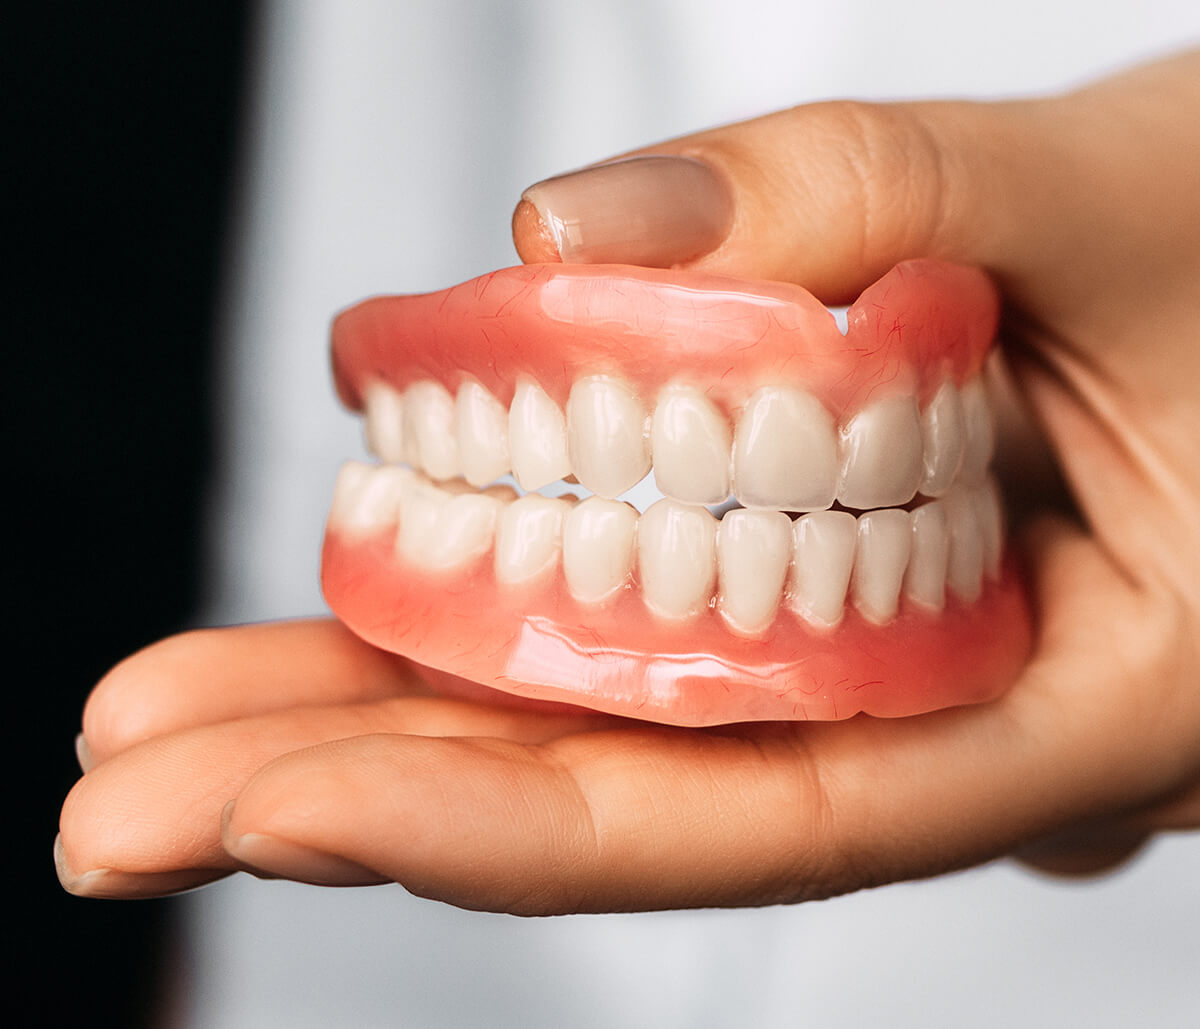 Custom dentures are indistinguishable from healthy, natural teeth in every way